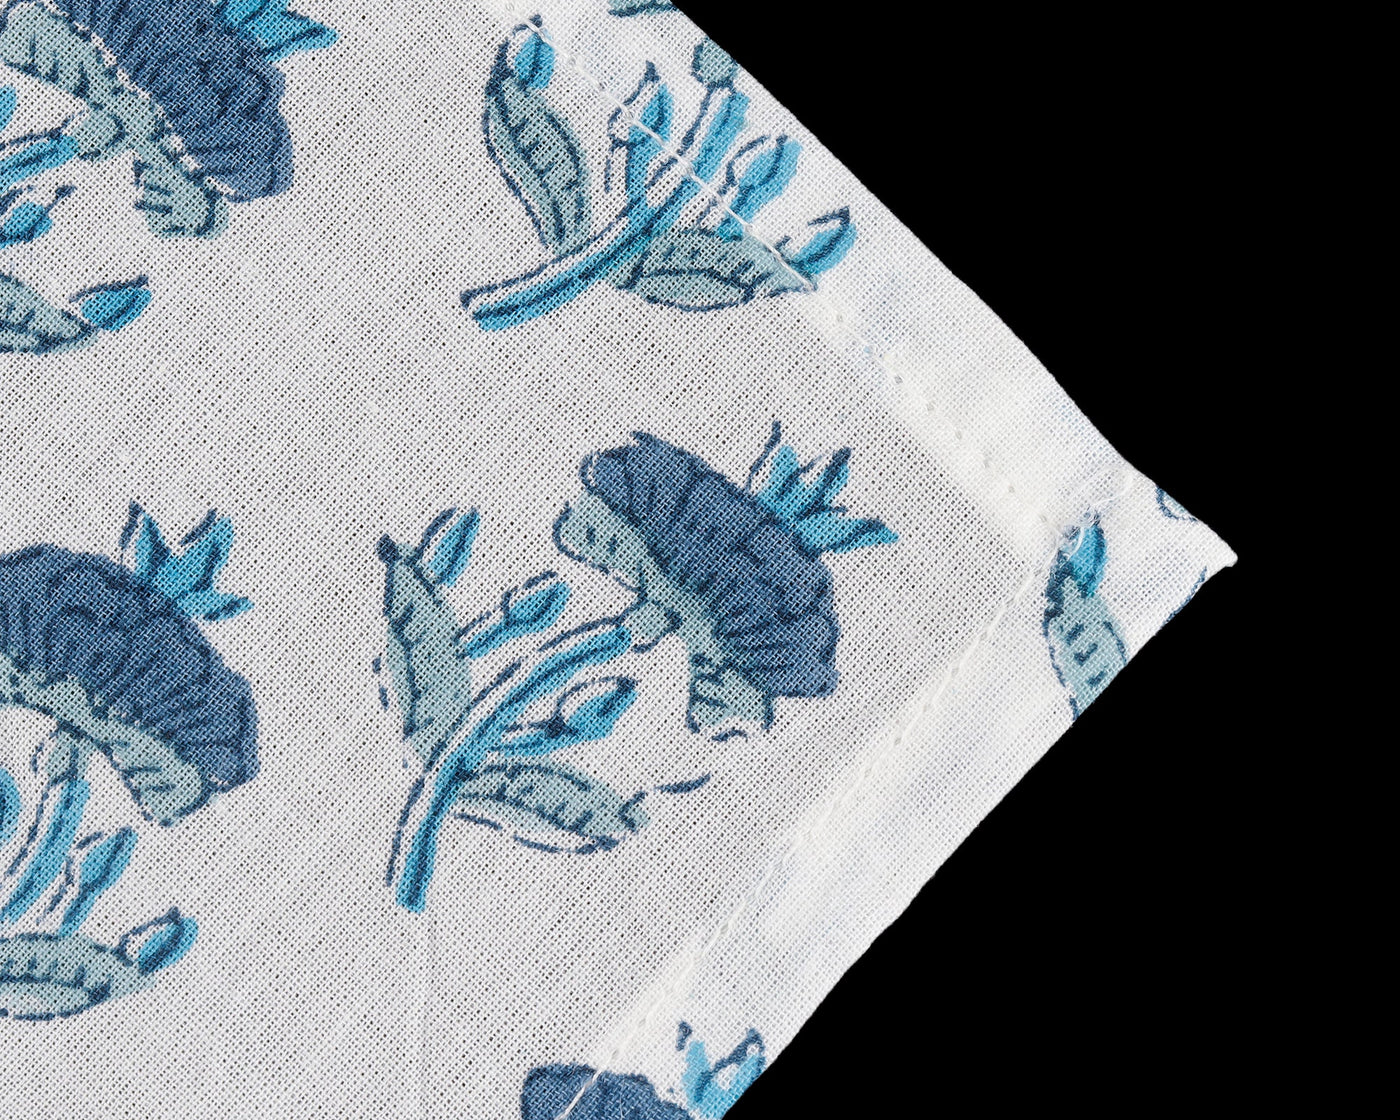 Carolina, Teal and Stone Blue Indian Floral Hand Block Printed Pure Cotton Cloth Napkins, 18x18"- Cocktail Napkins, 20x20"- Dinner Napkins